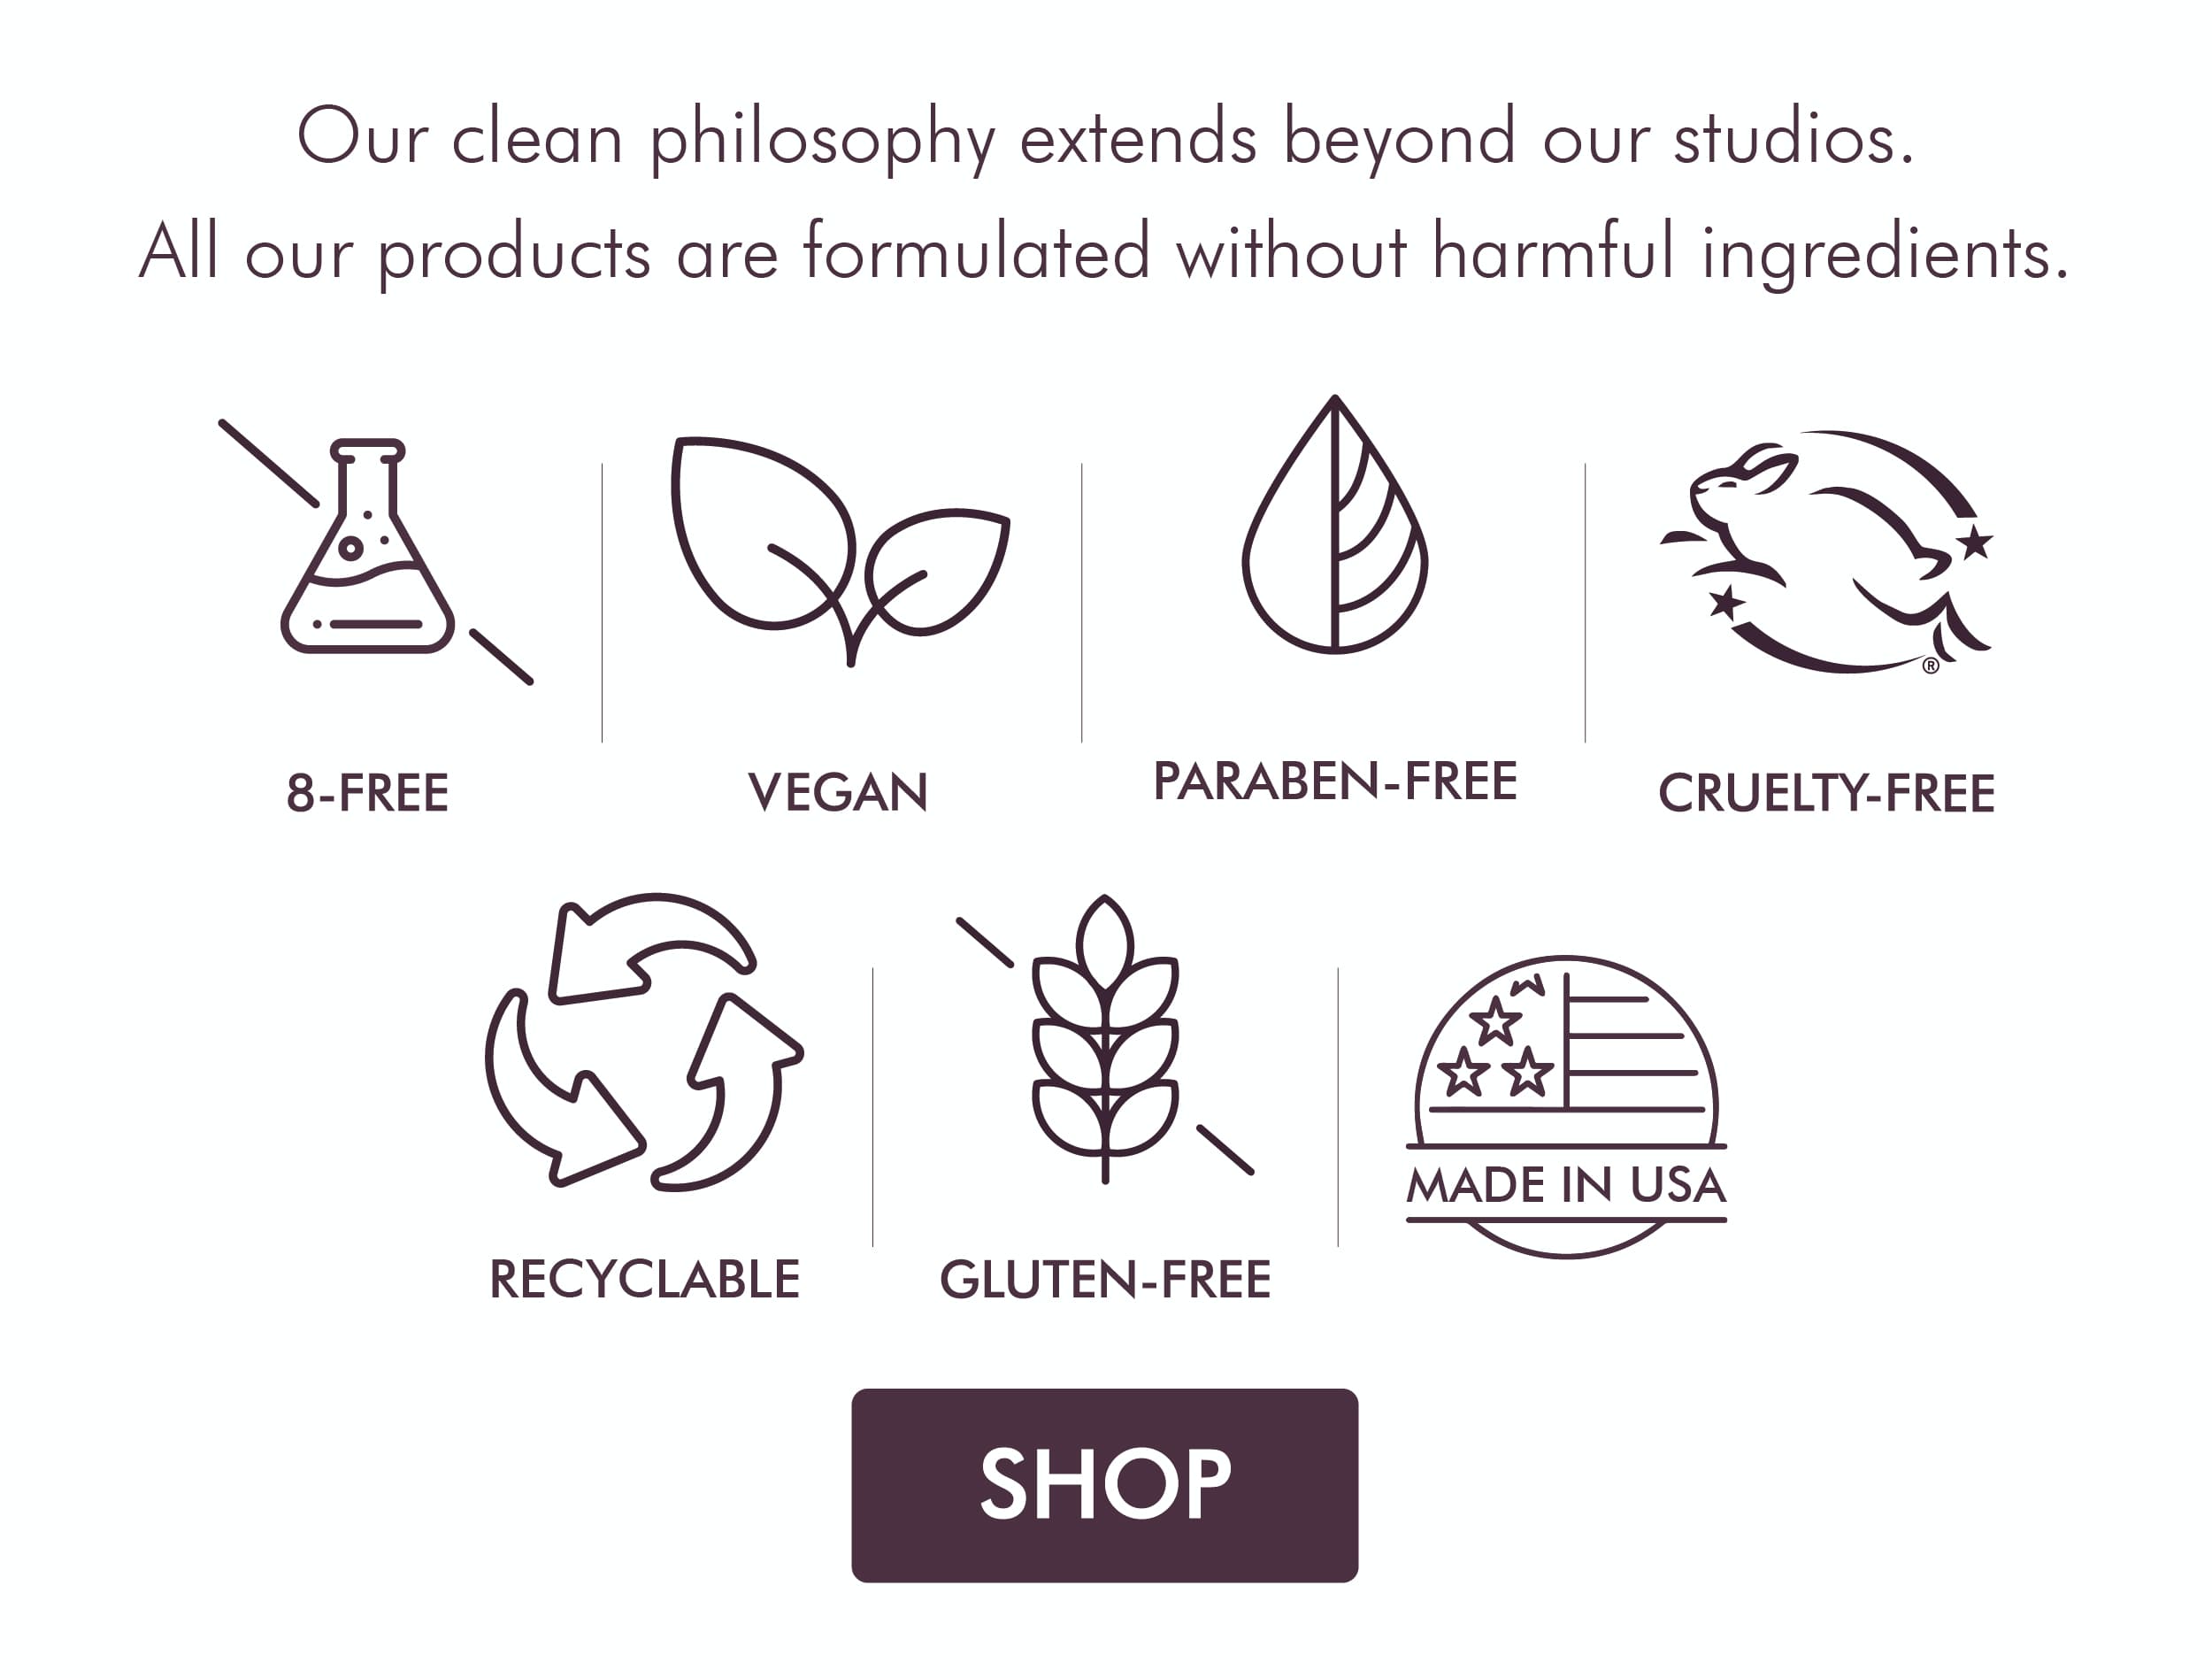 All Our Products Are Formulated Without Harmful Ingredients